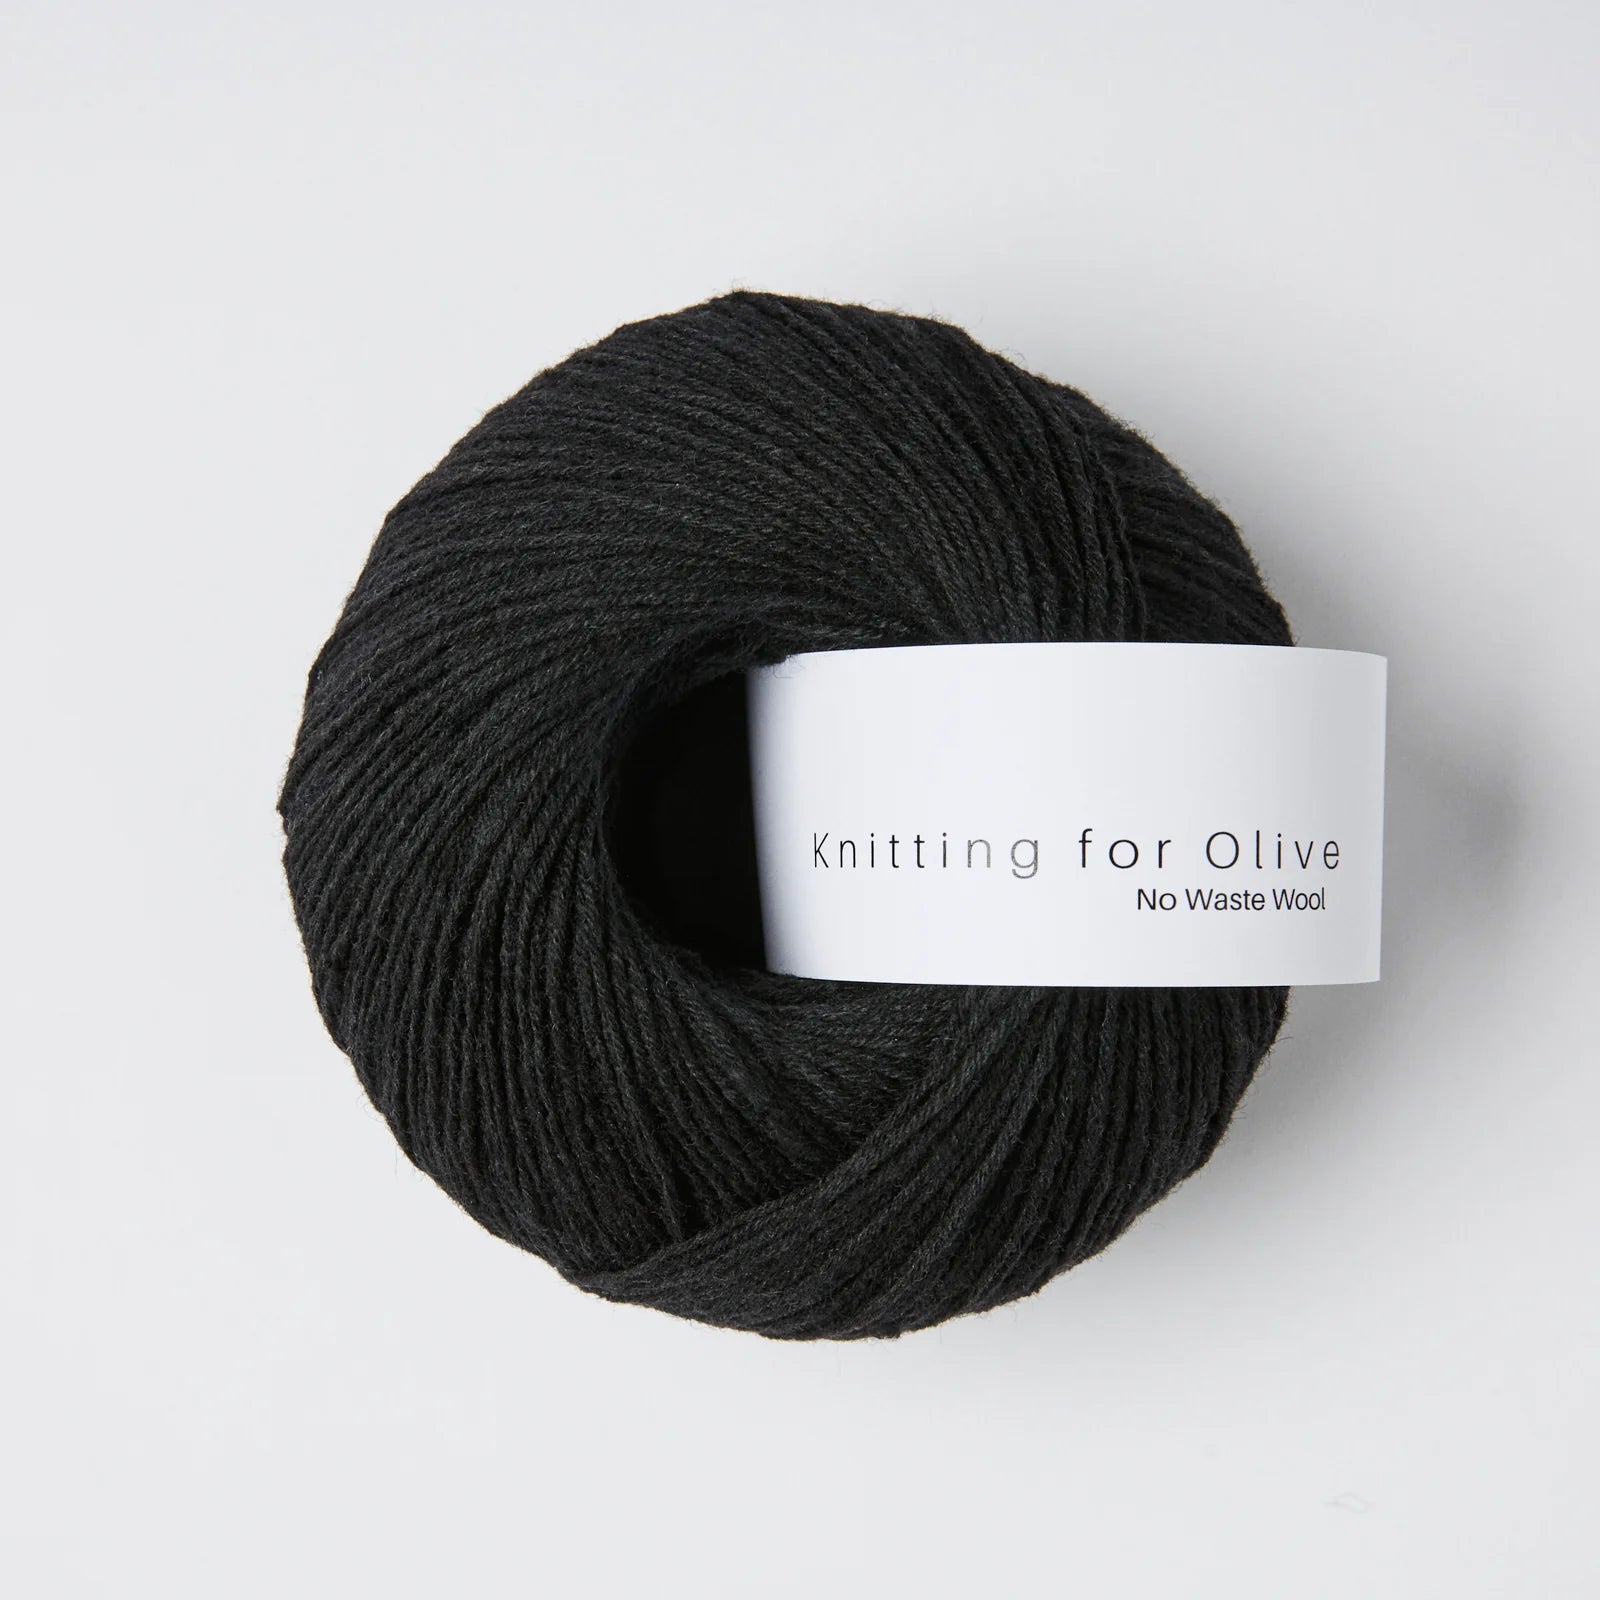 Knitting for Olive No Waste Wool - Knitting for Olive - Licorice - The Little Yarn Store